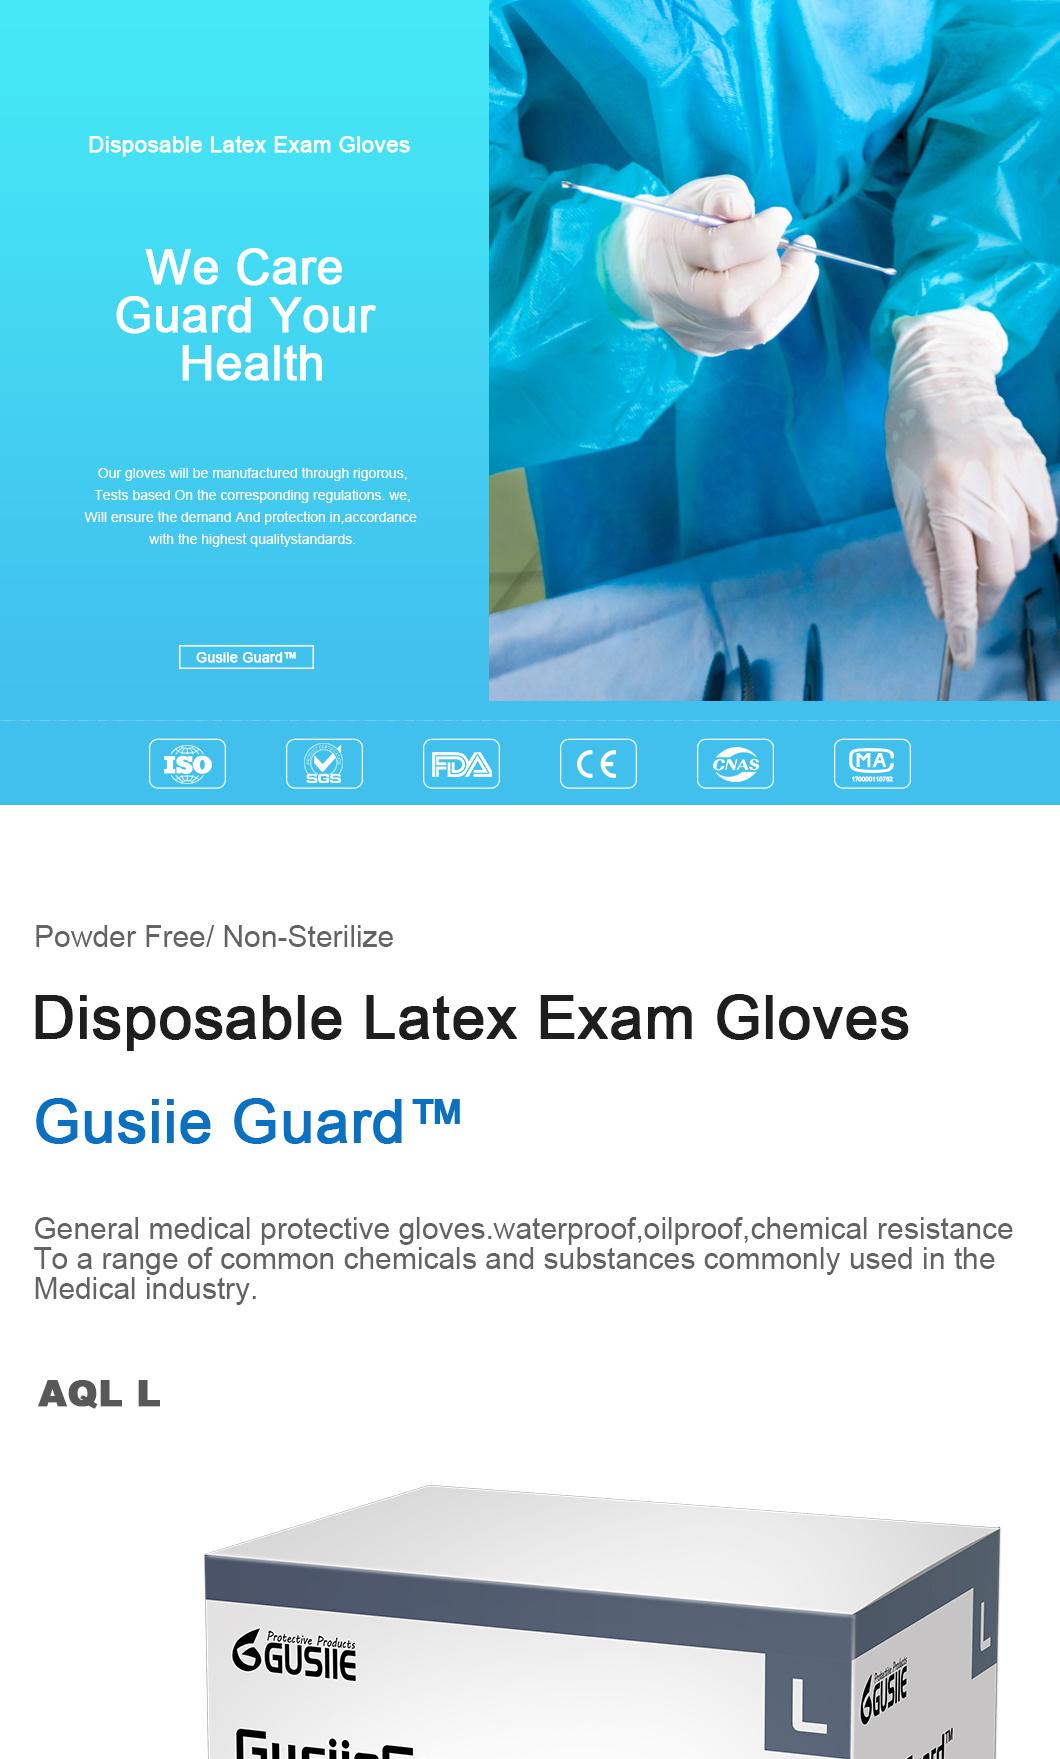 Disposable Strong Stretchable Powder Free Latex Surgical Medical Examination Gloves (LG100)